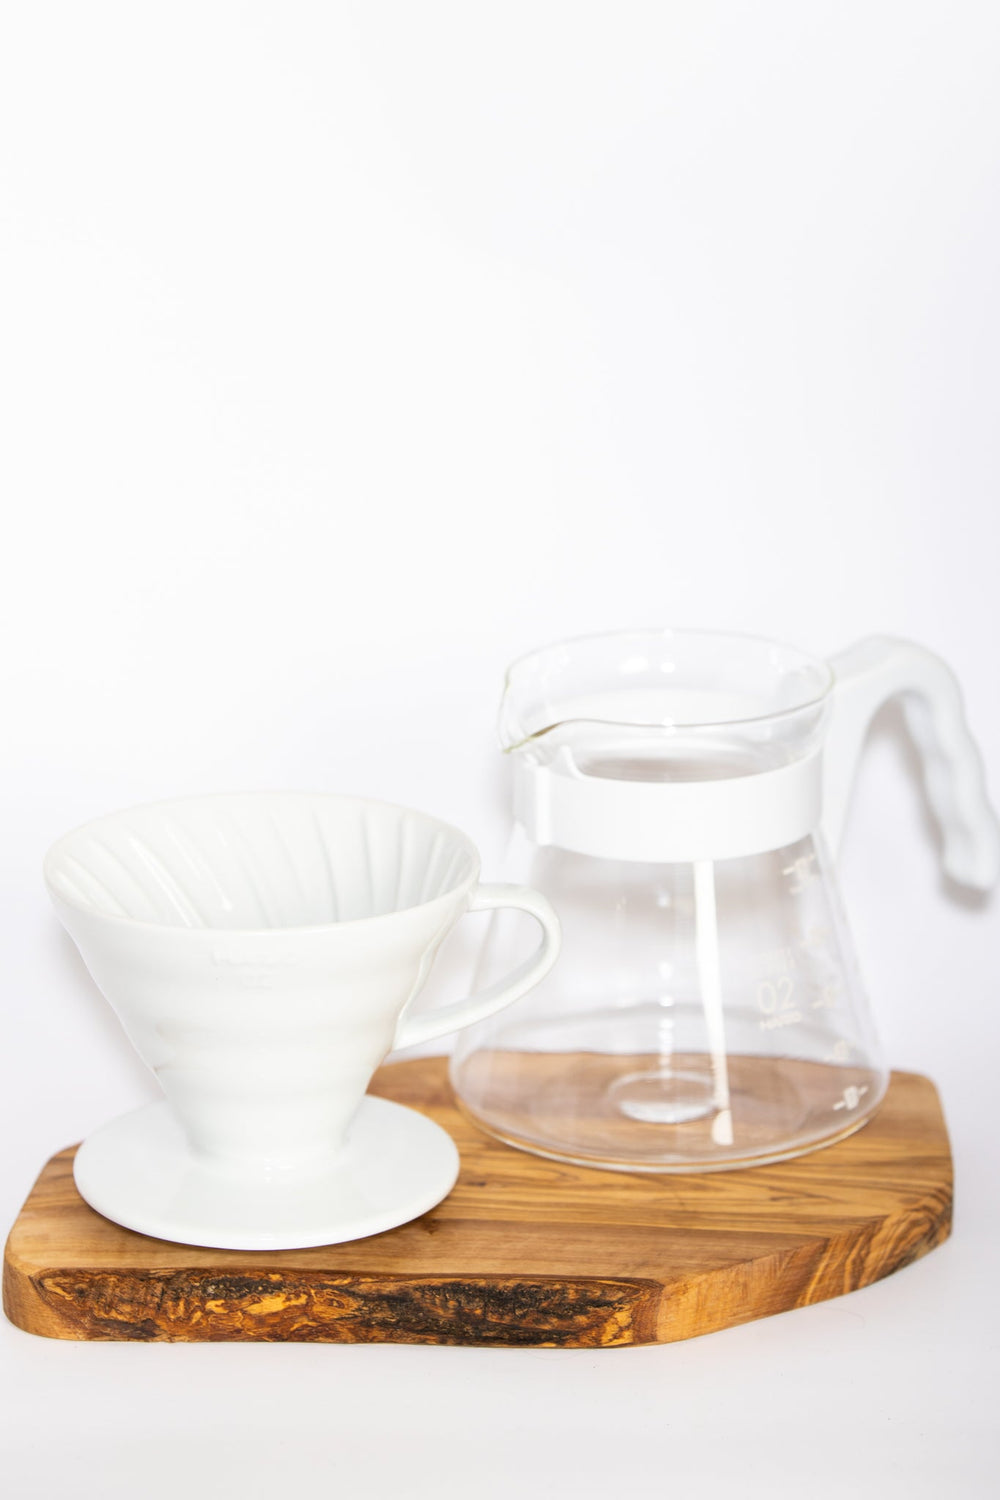 Hario V60 "Simply Hario" Pour Over Coffee Set, 02 - White - Be Good Coffee Co.